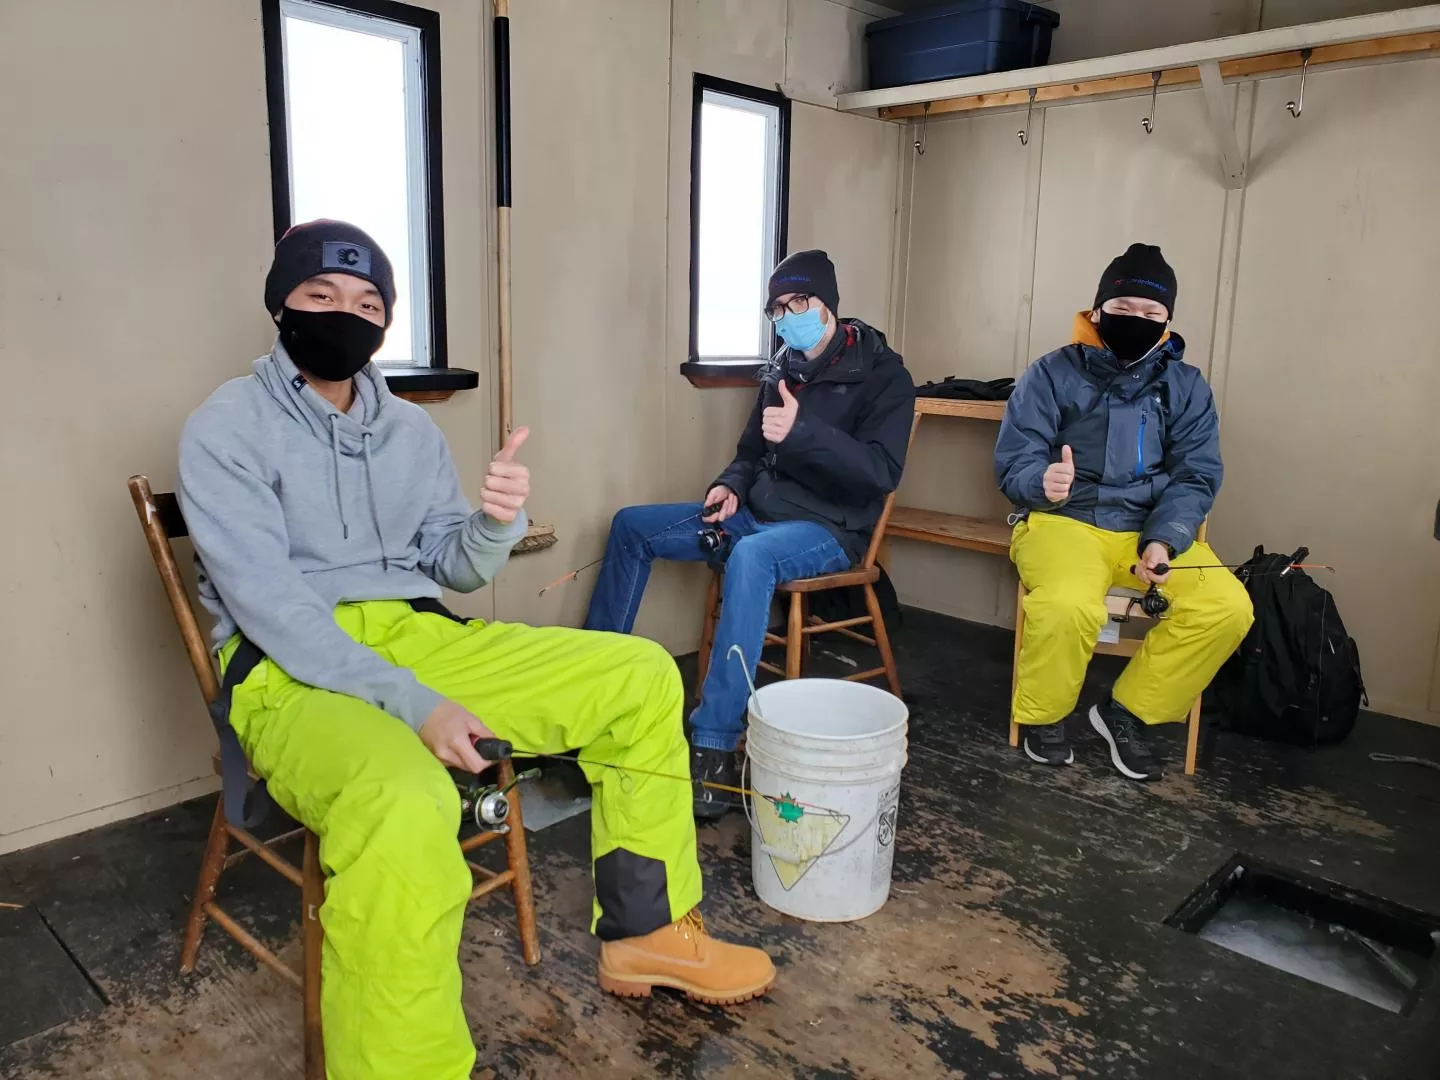 Culinary Management Ice Fishing Field Trip